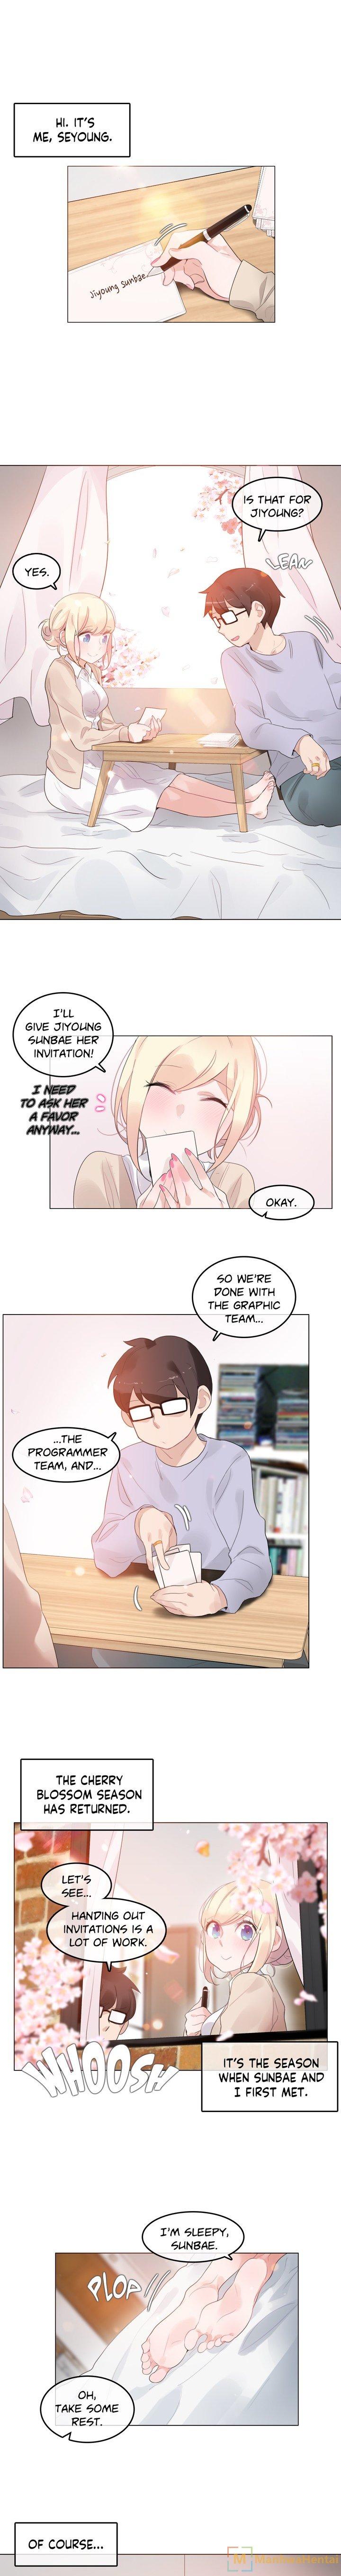 A Pervert's Daily Life • Chapter 56-60 44